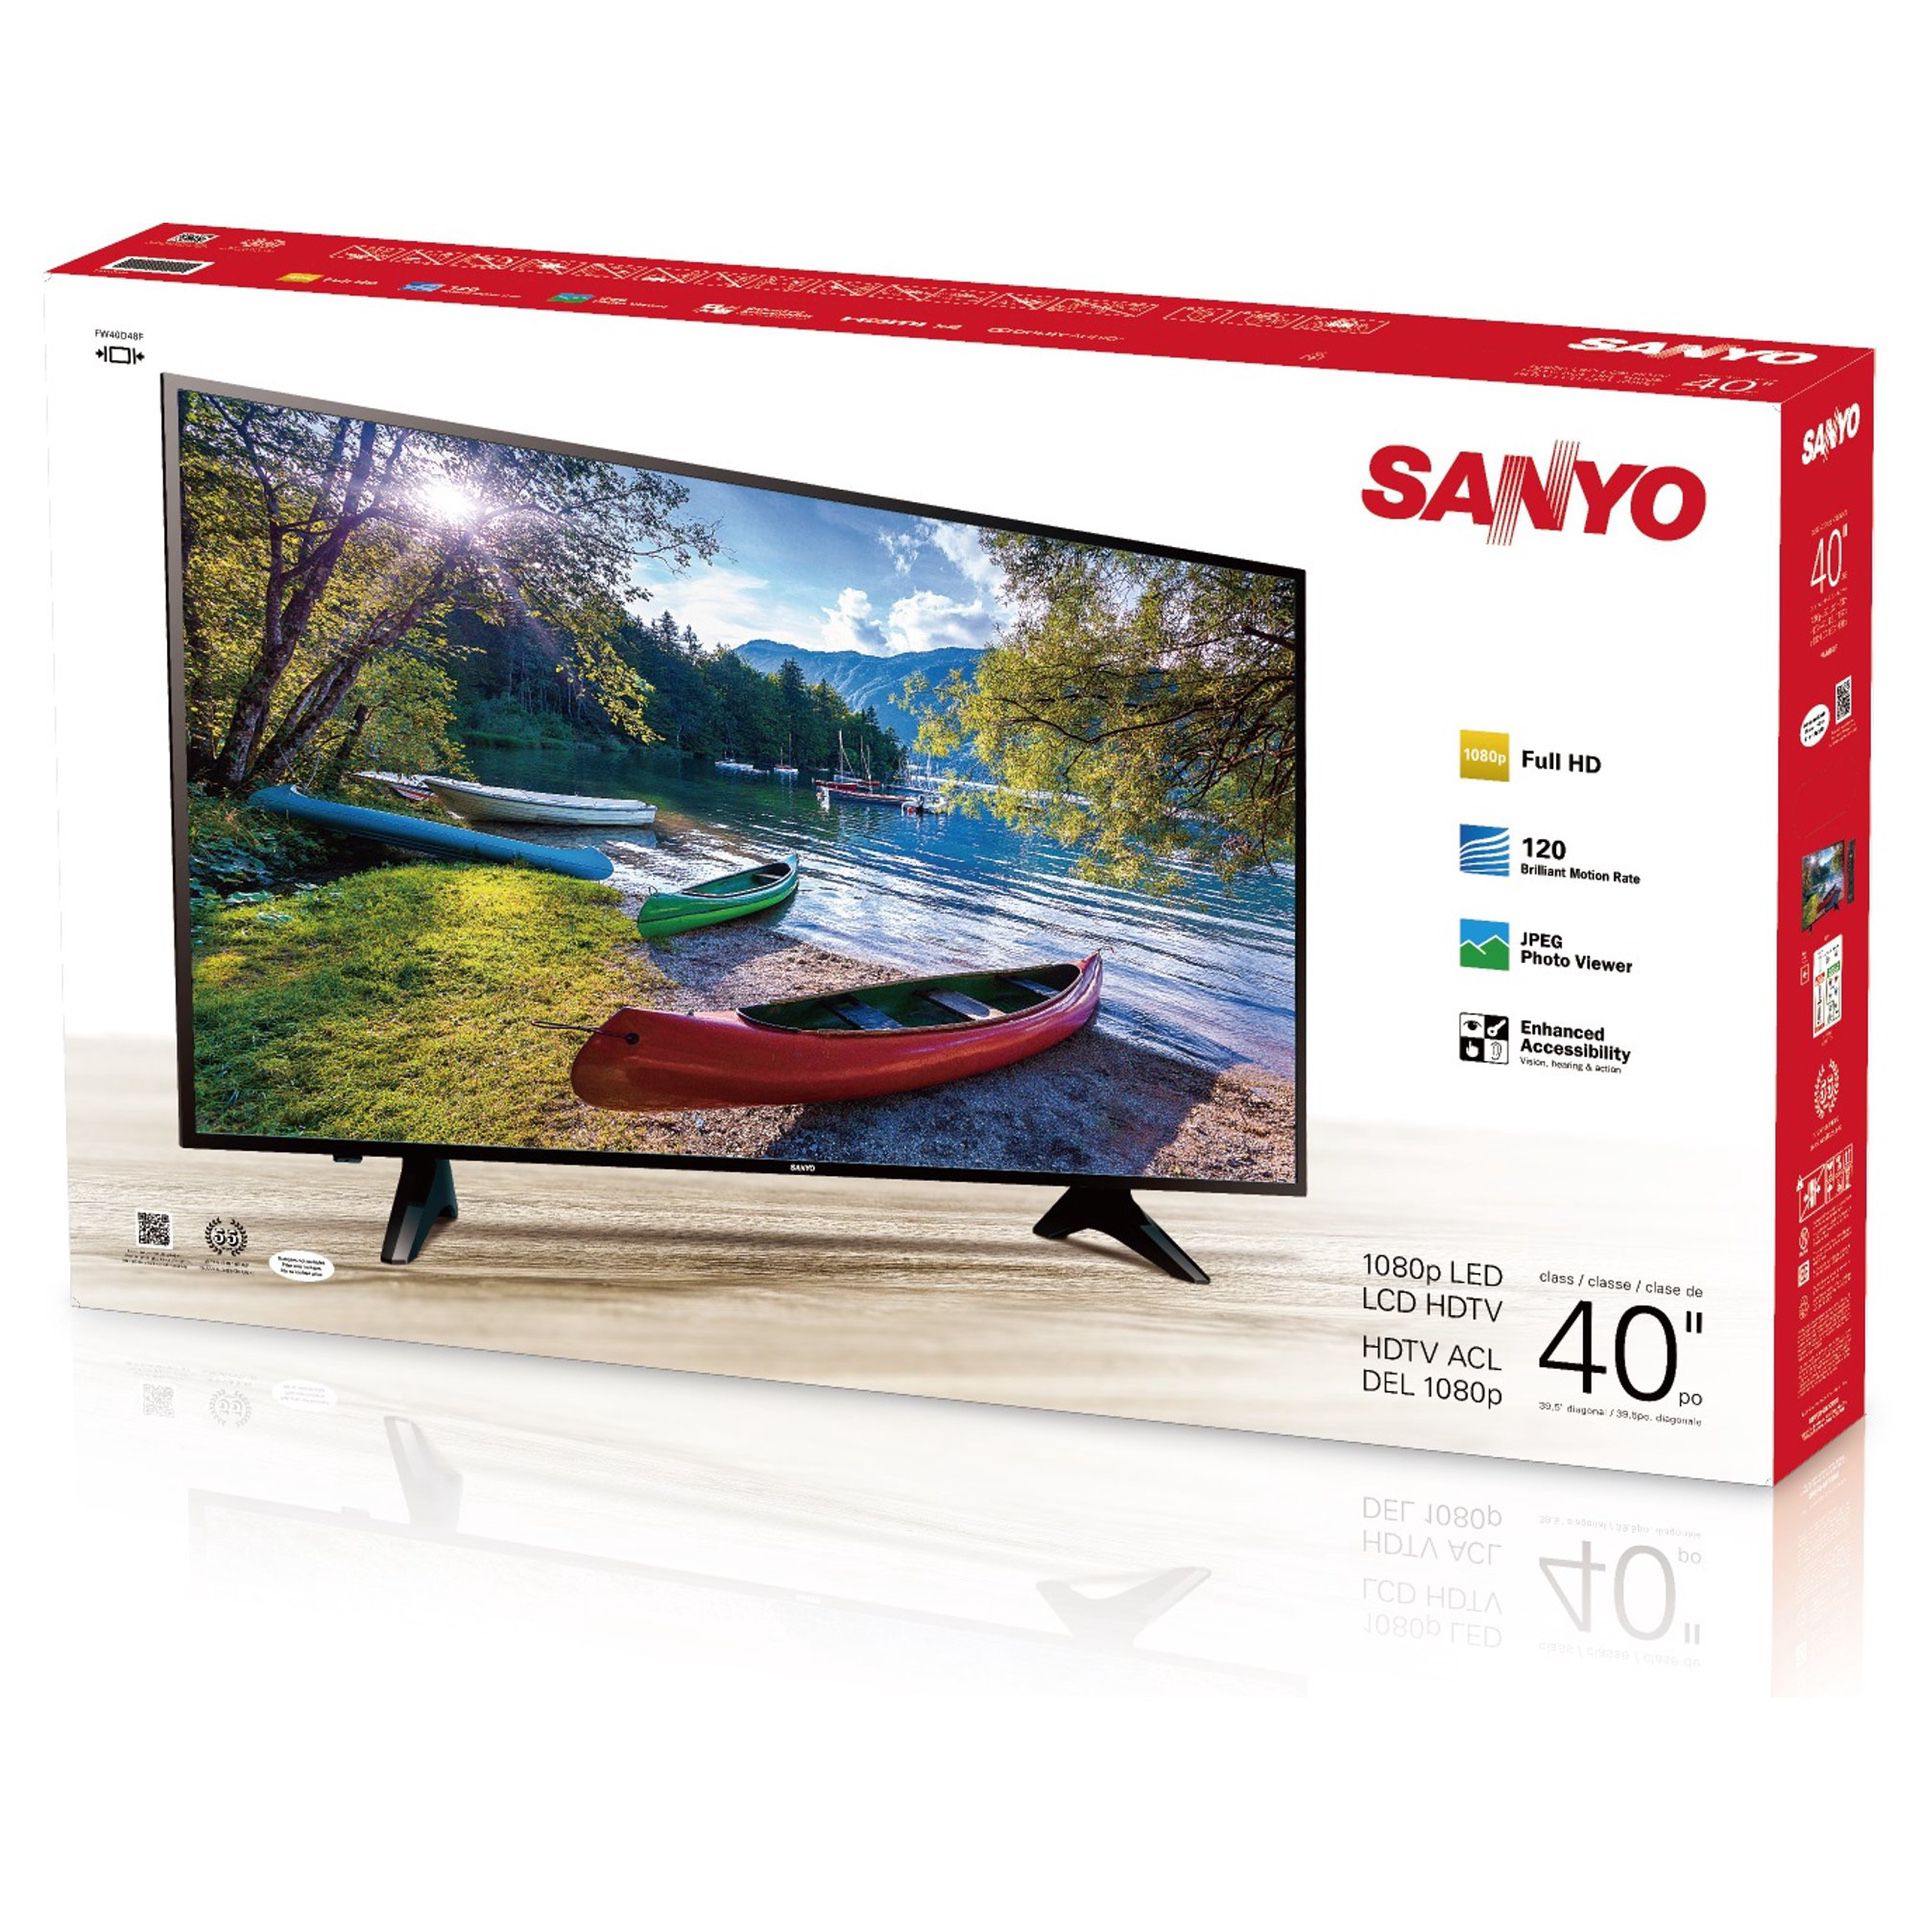 Sanyo 40" Class FHD (1080P) LED TV (FW40D48F) - Reply your offer.